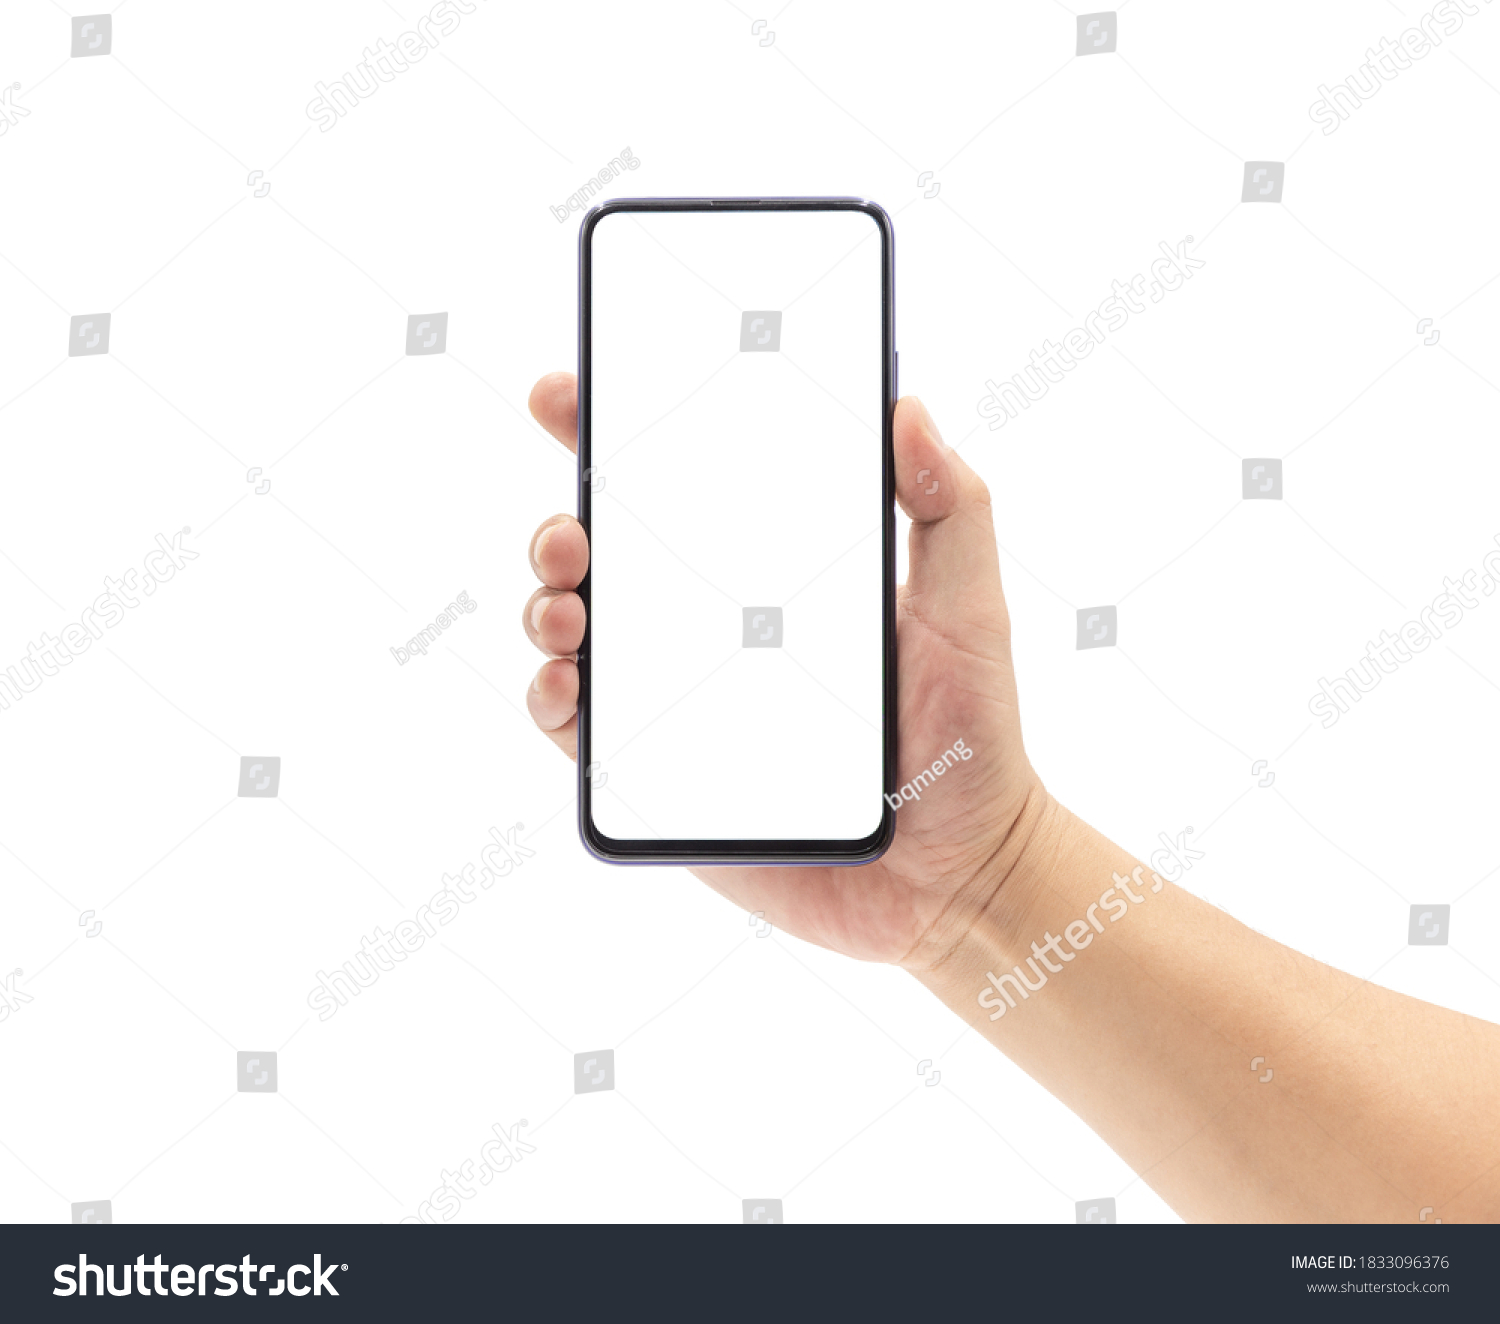 A man's hand holds a blank smartphone with a black frame. #1833096376